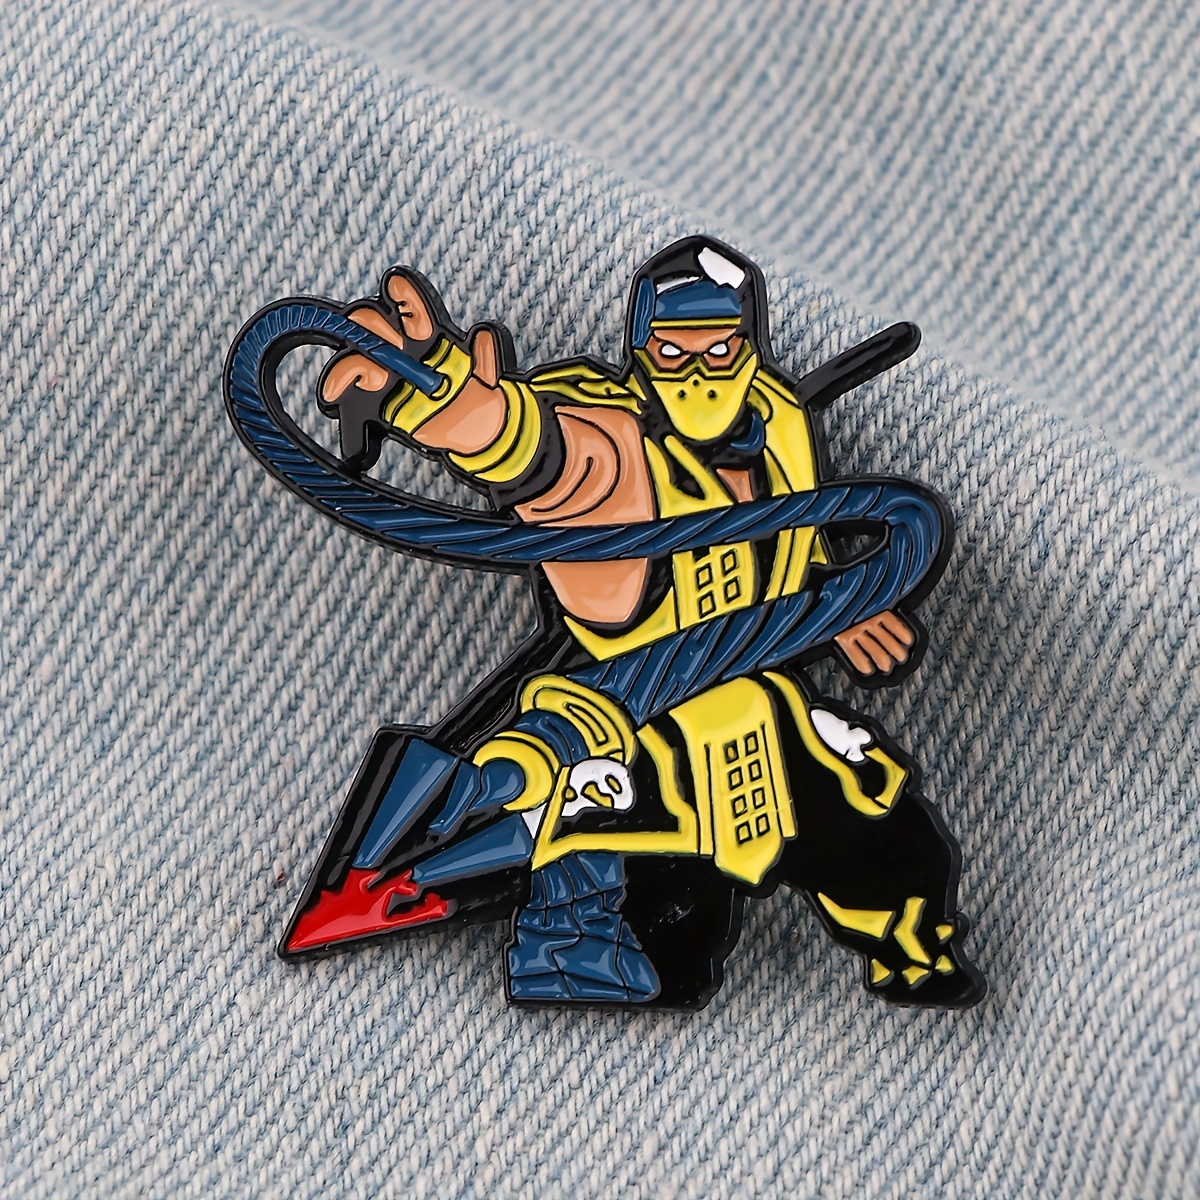 Cool Wrestling Cm Punk Pattern Icons Pins Badge Decoration Brooches Metal  Badges For Backpack Decoration